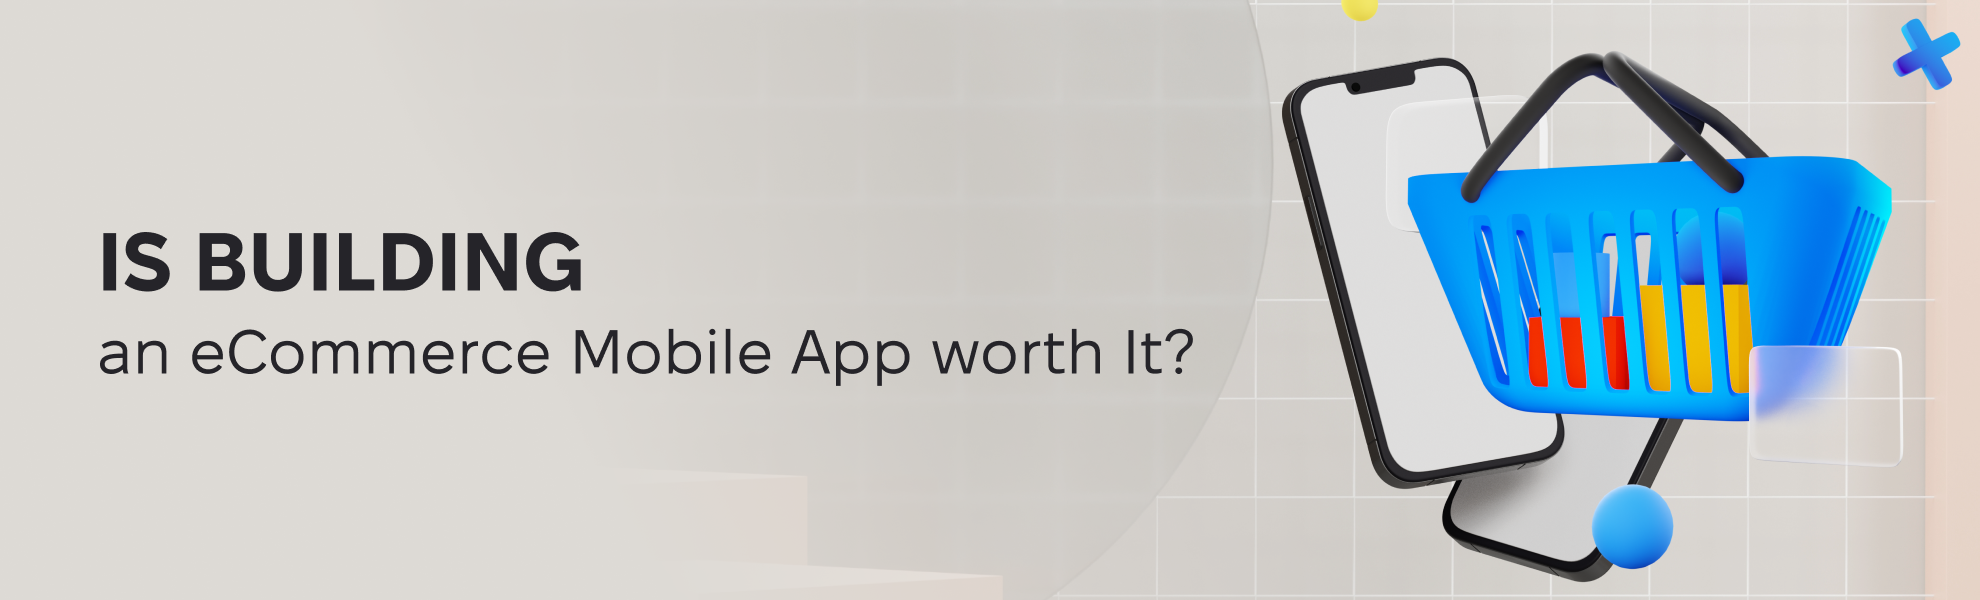 Is Building E-Commerce Mobile Applications Really Worth It?